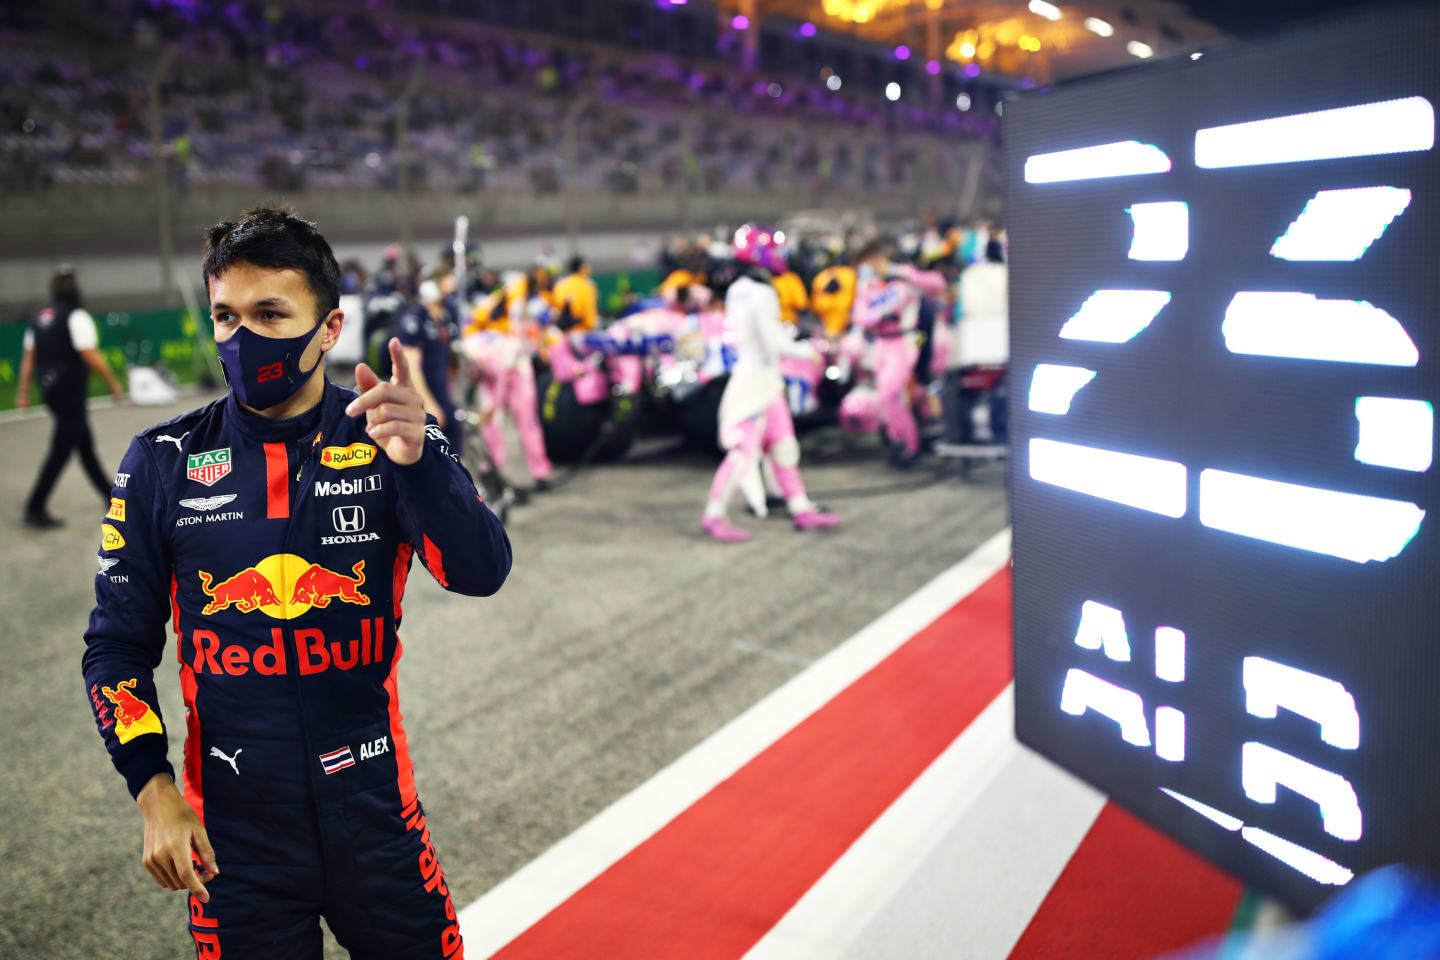 BAHRAIN, BAHRAIN - DECEMBER 06: Alexander Albon of Thailand and Red Bull Racing prepares to drive on the grid before the F1 Grand Prix of Sakhir at Bahrain International Circuit on December 06, 2020 in Bahrain, Bahrain. (Photo by Mark Thompson/Getty Images)